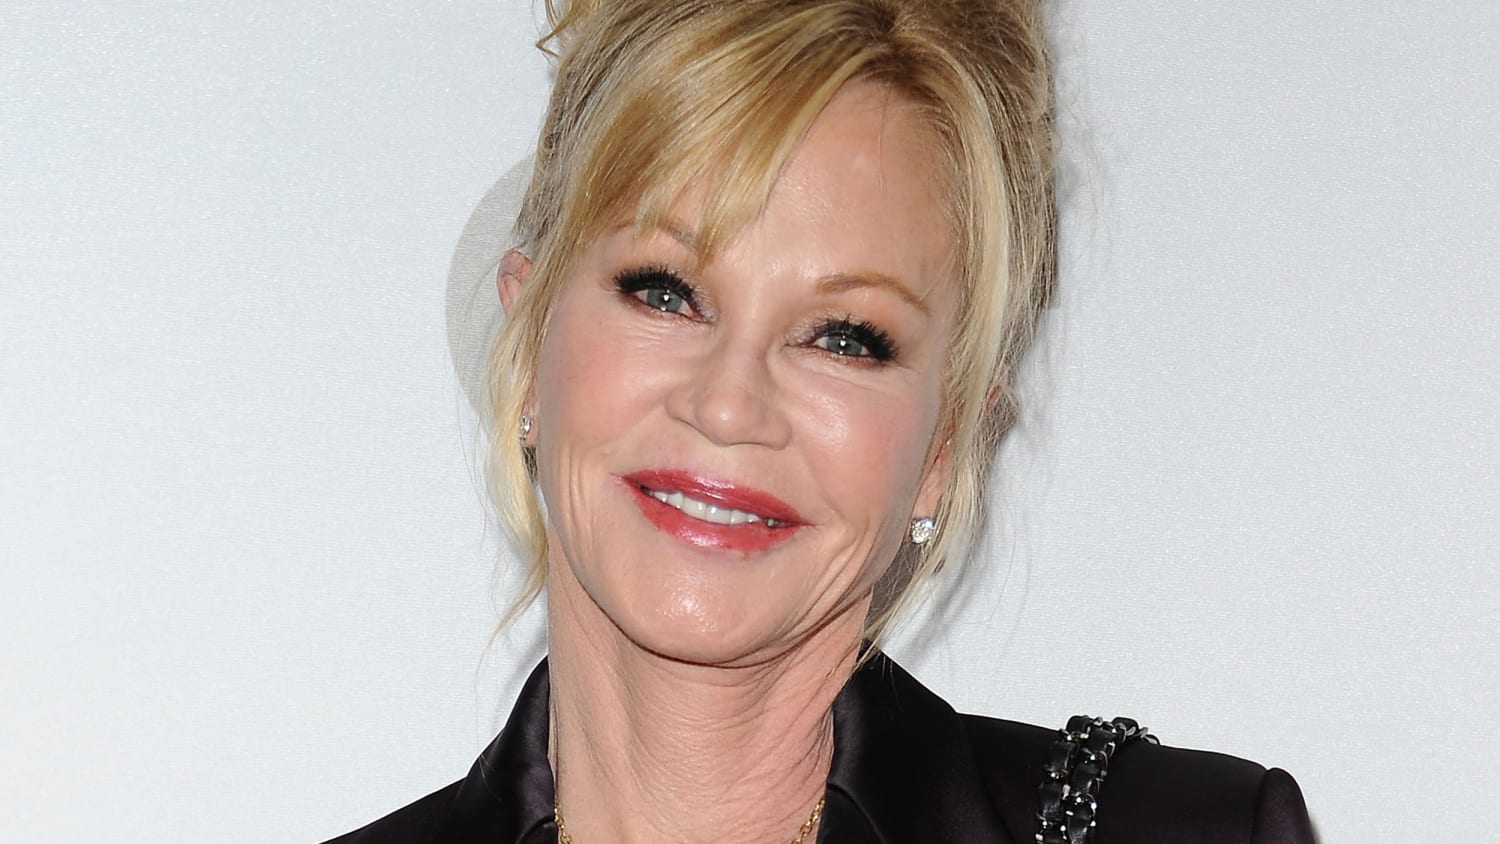 Melanie Griffith on quitting cosmetic surgery 'Hopefully I look more